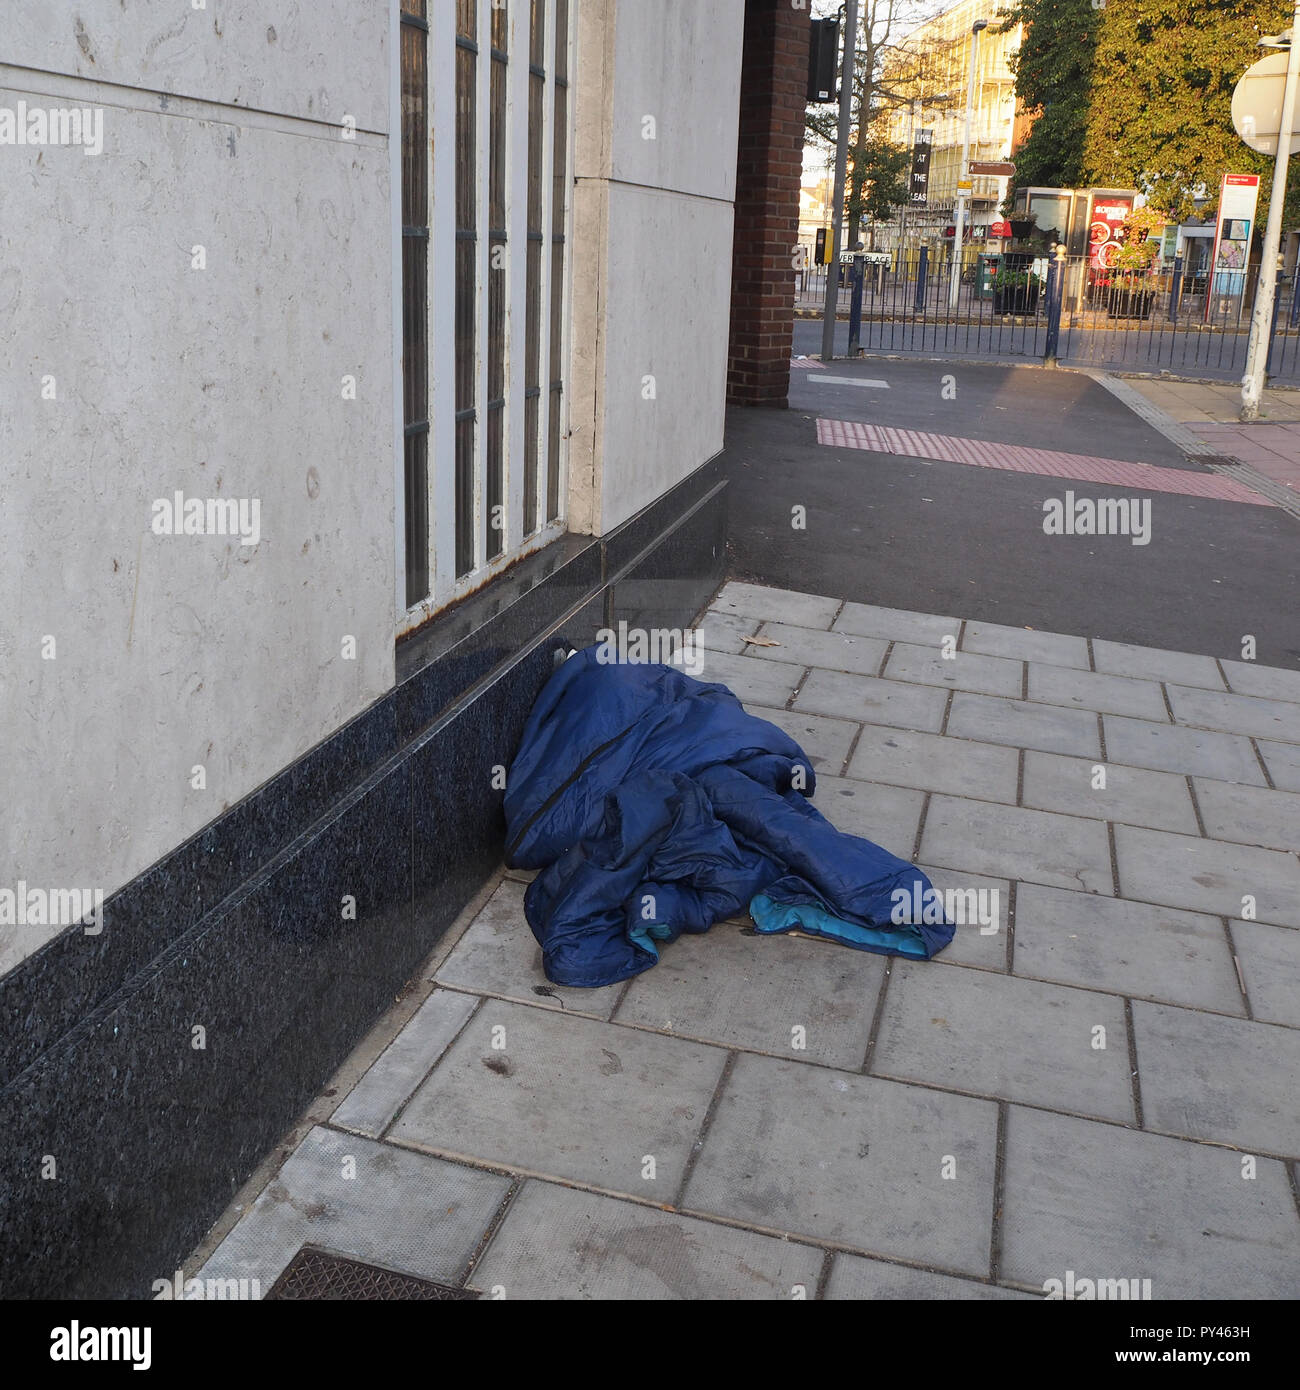 Discarded sleeping blanket left on the high street Stock Photo